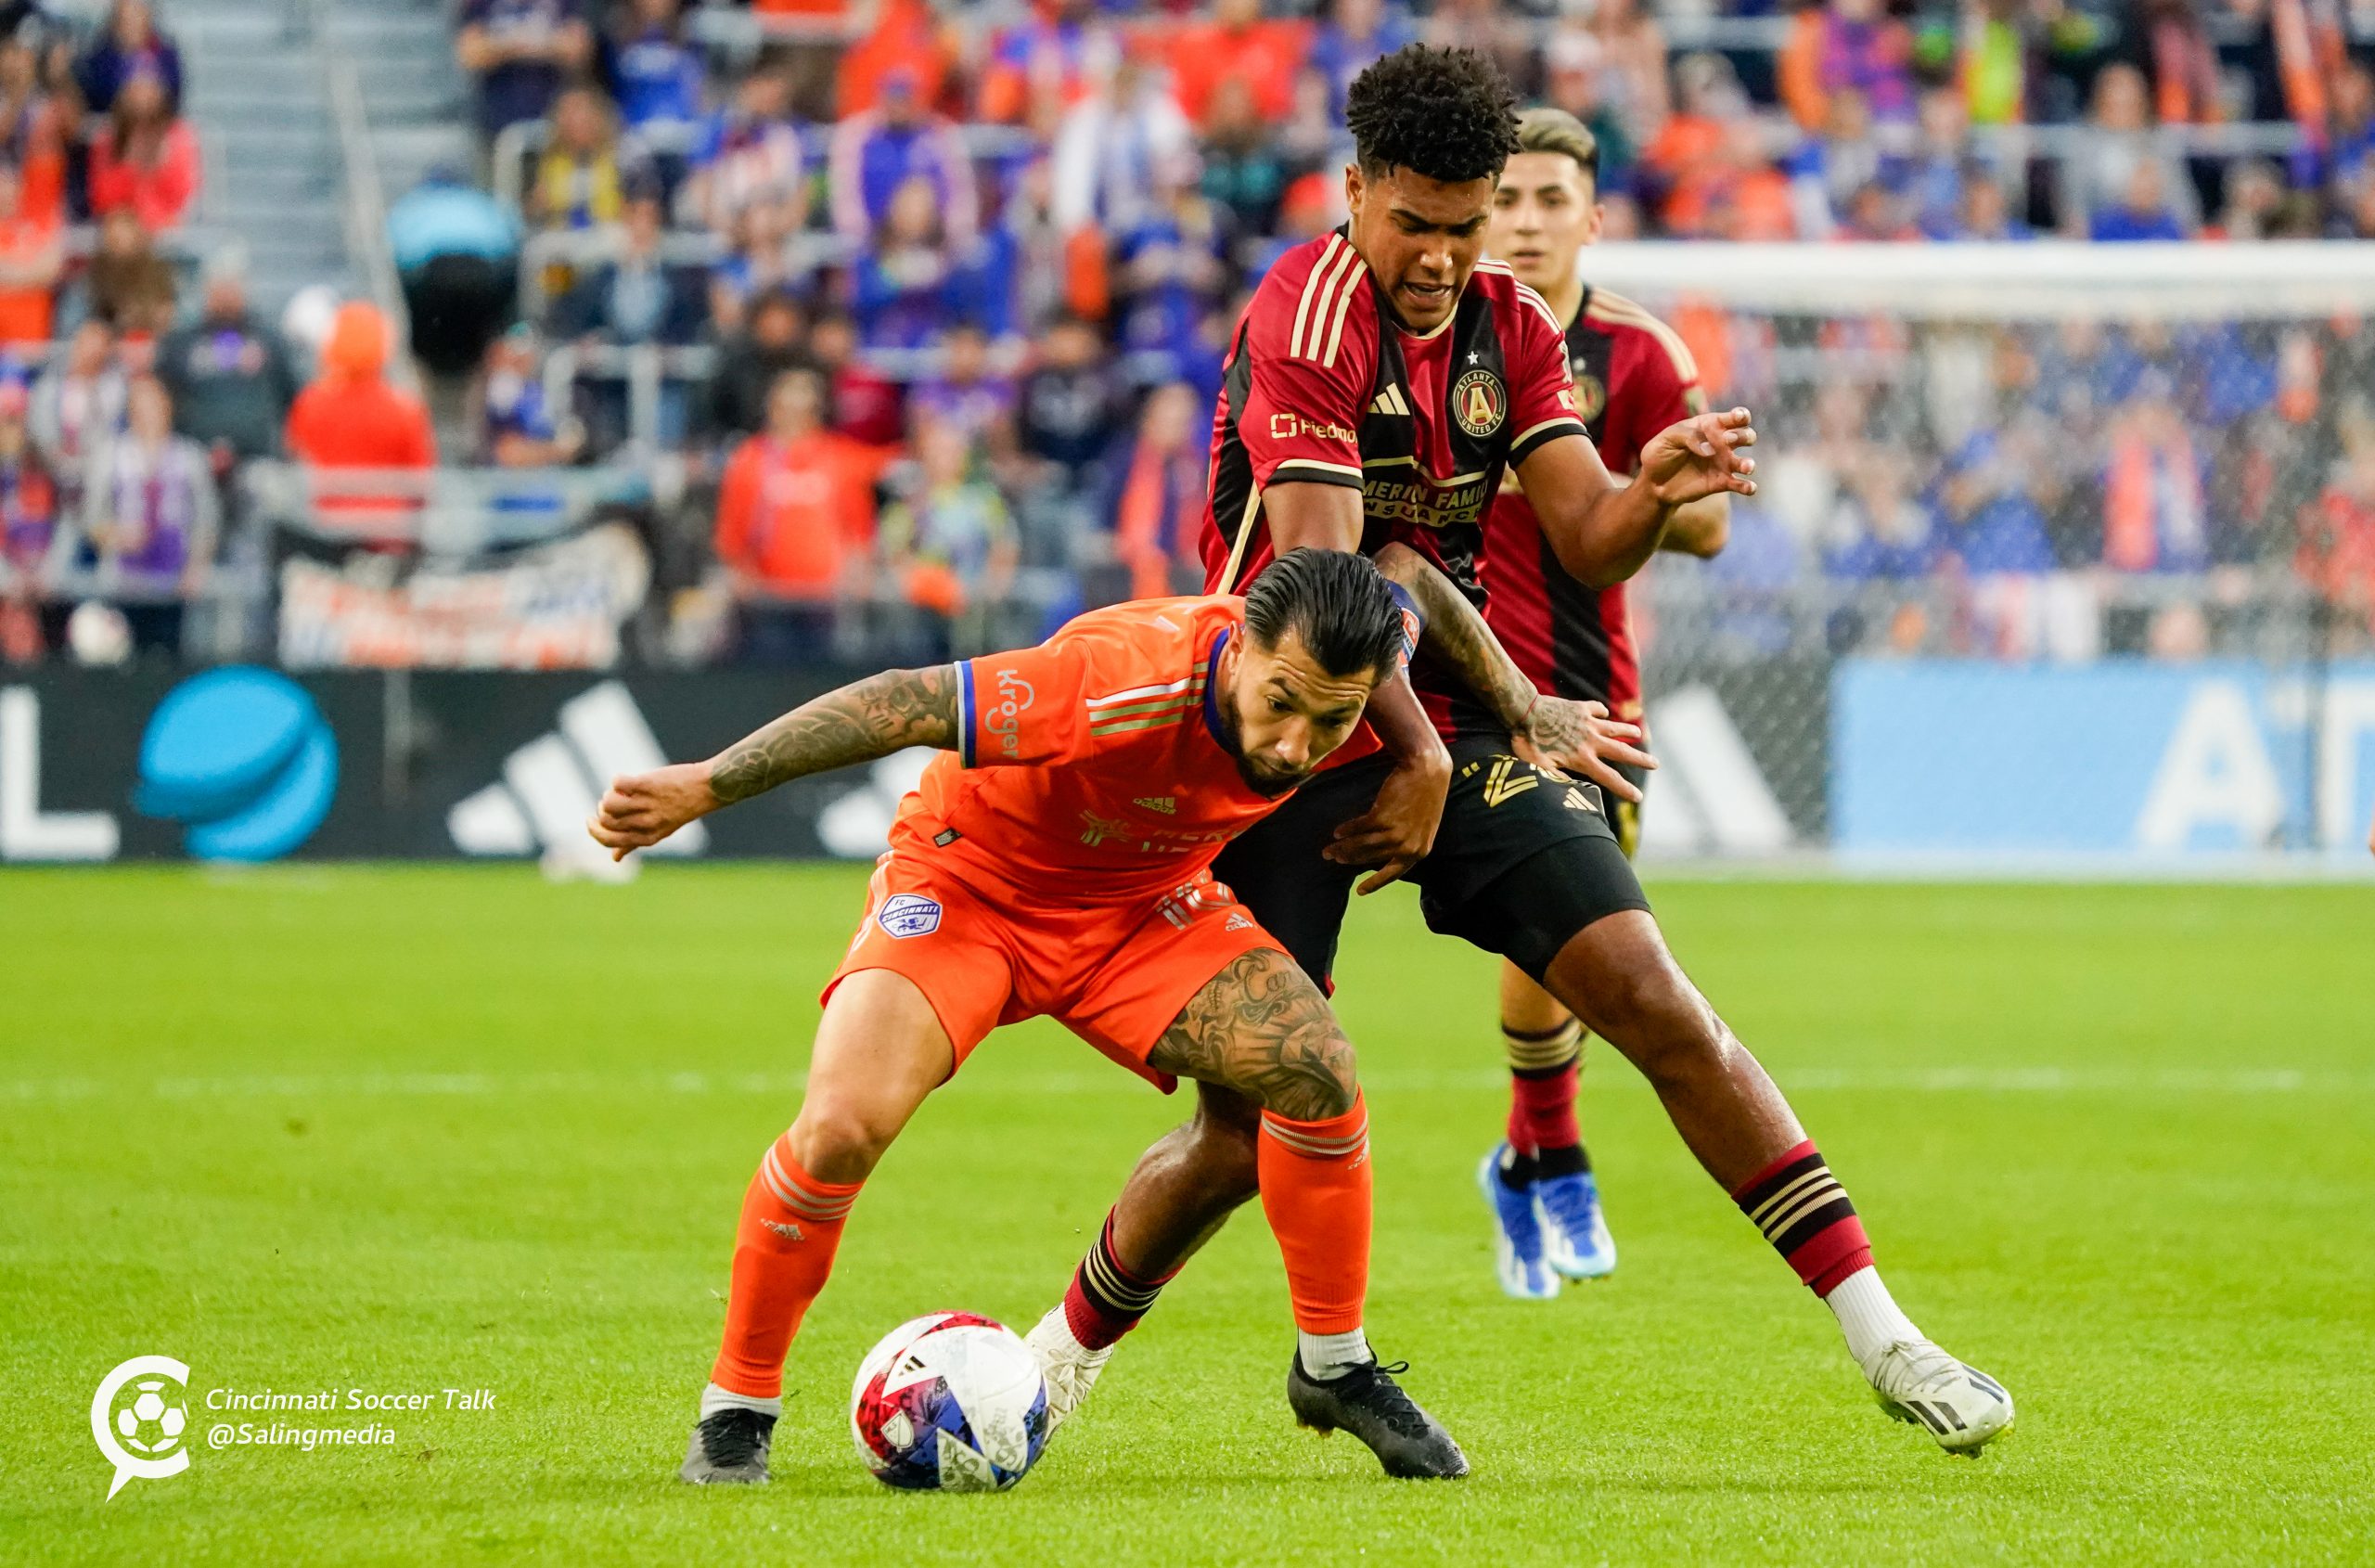 Atlanta United return to winning ways with 1-0 win over New York Red Bulls  - Dirty South Soccer